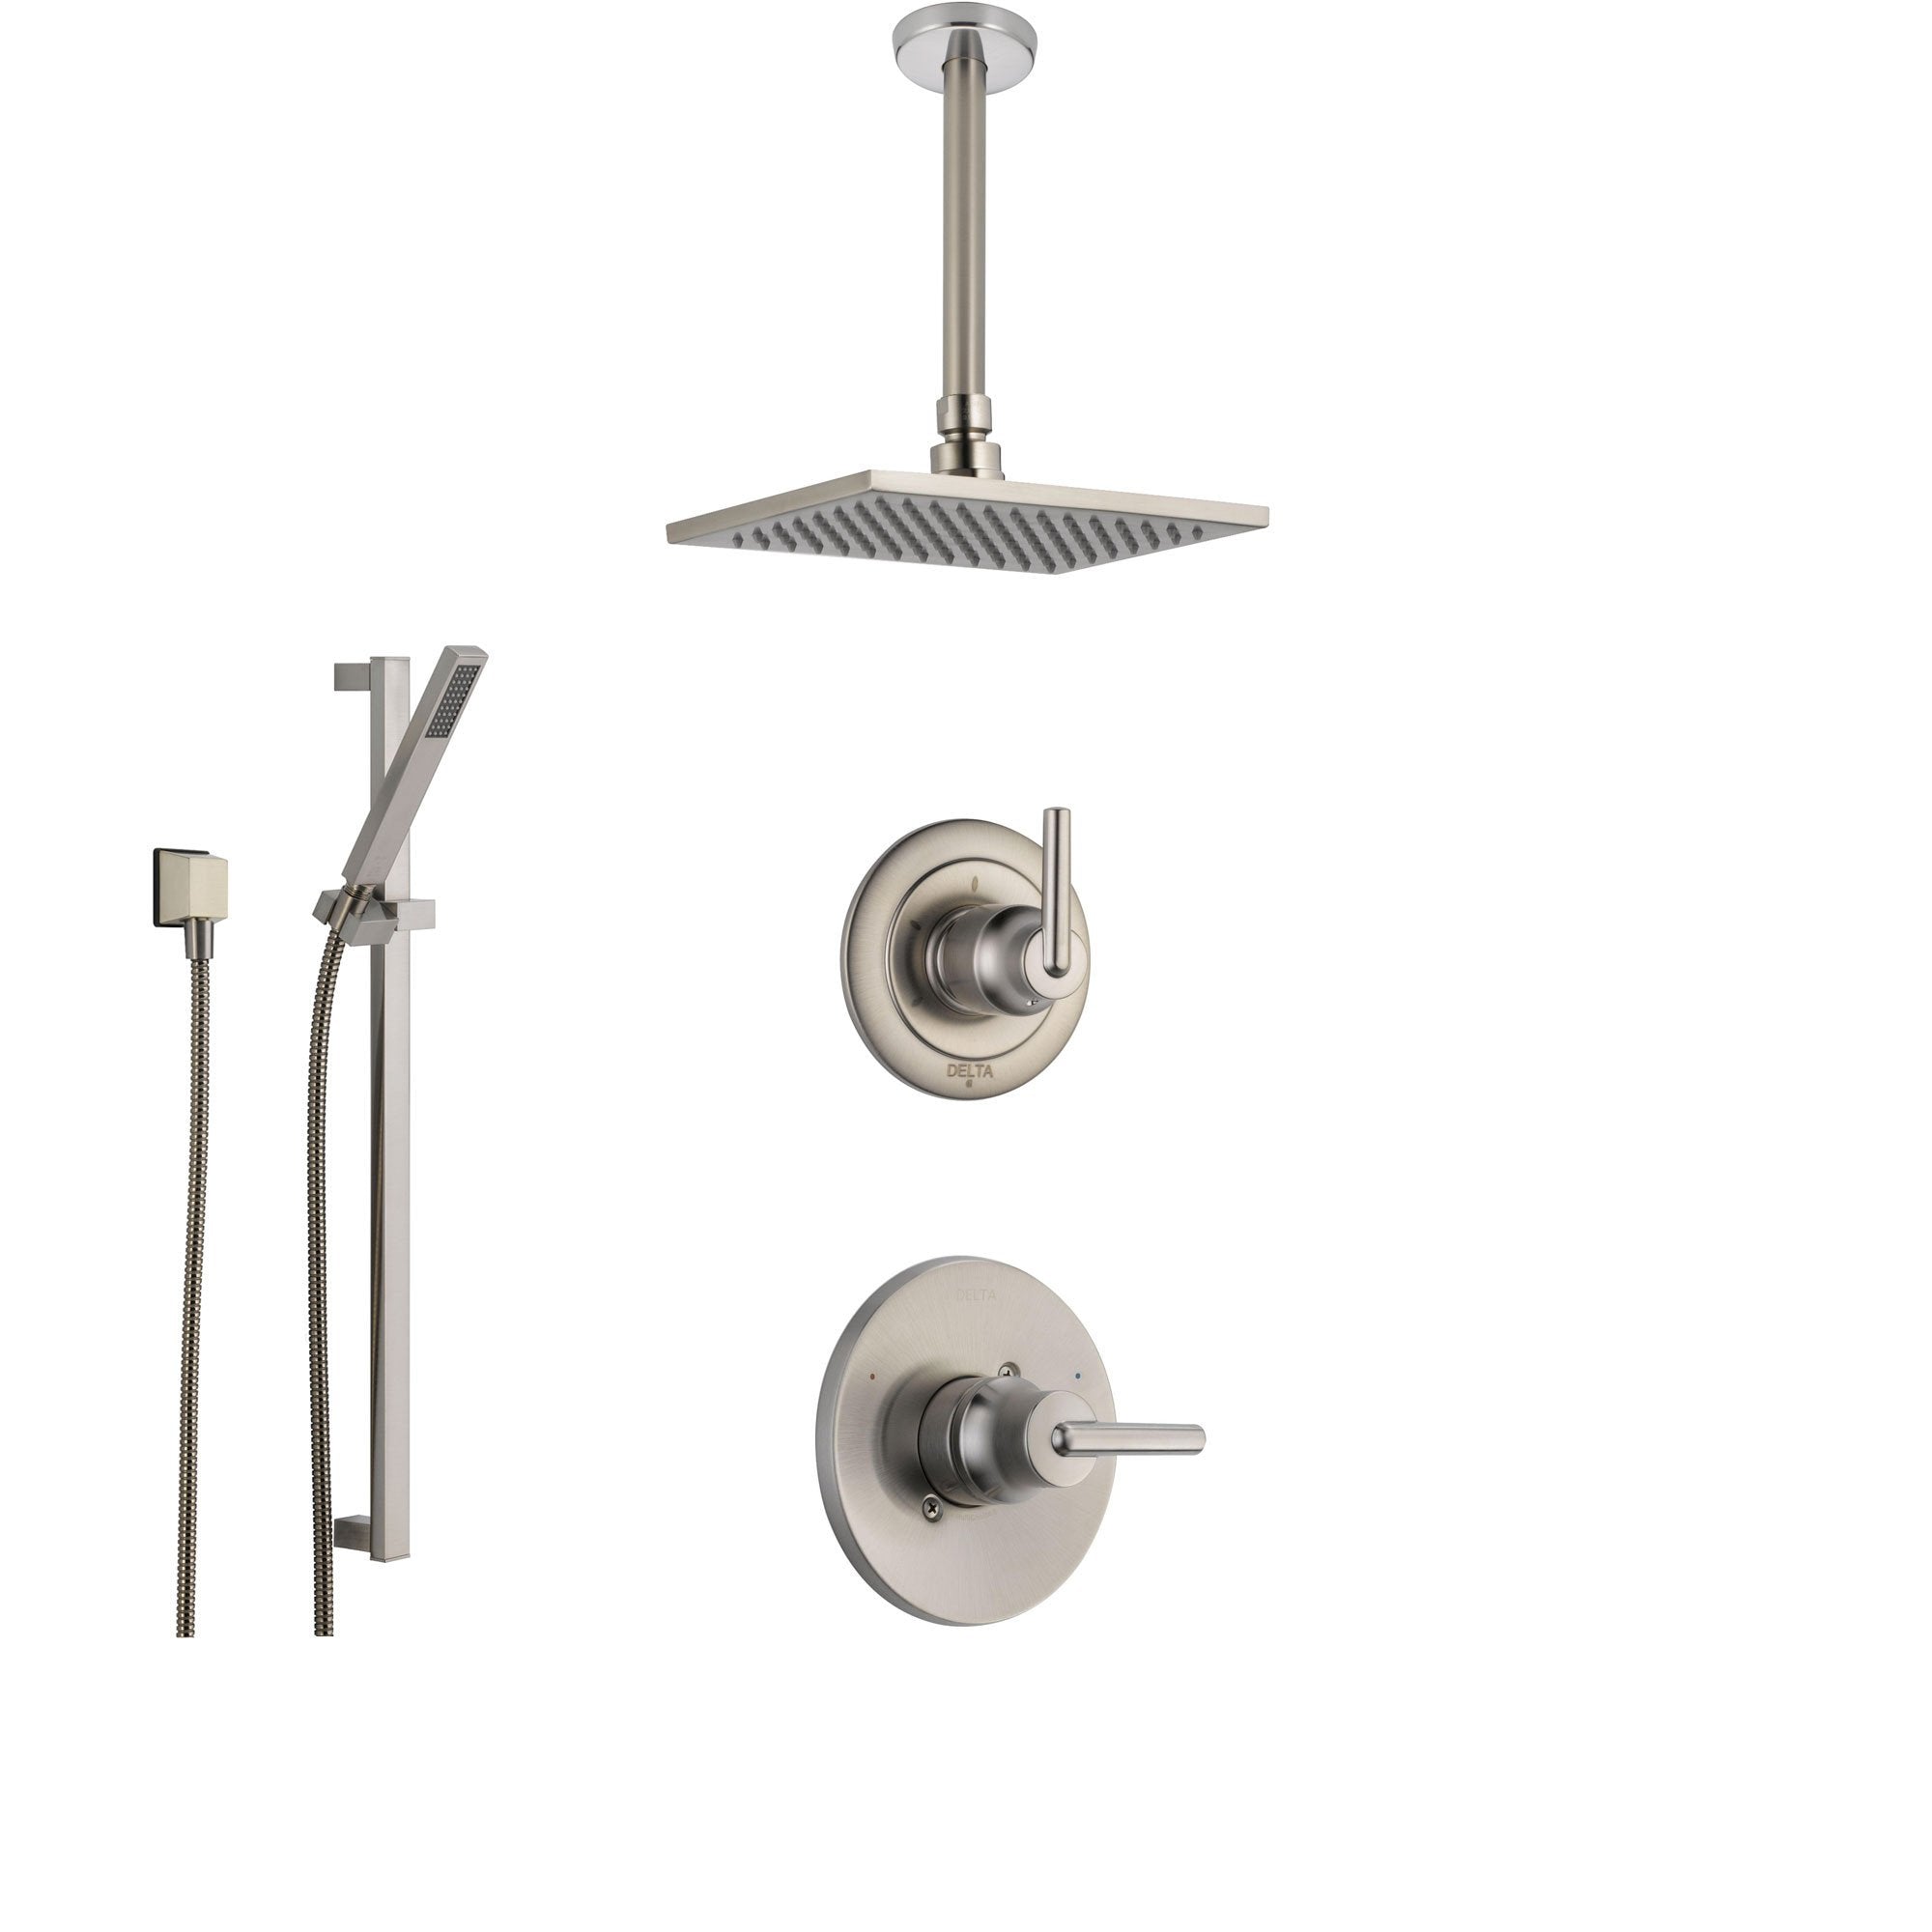 Delta Trinsic Stainless Steel Shower System with Normal Shower Handle, 3-setting Diverter, Modern Square Ceiling Mount Showerhead, and Hand Shower Spray SS145985SS